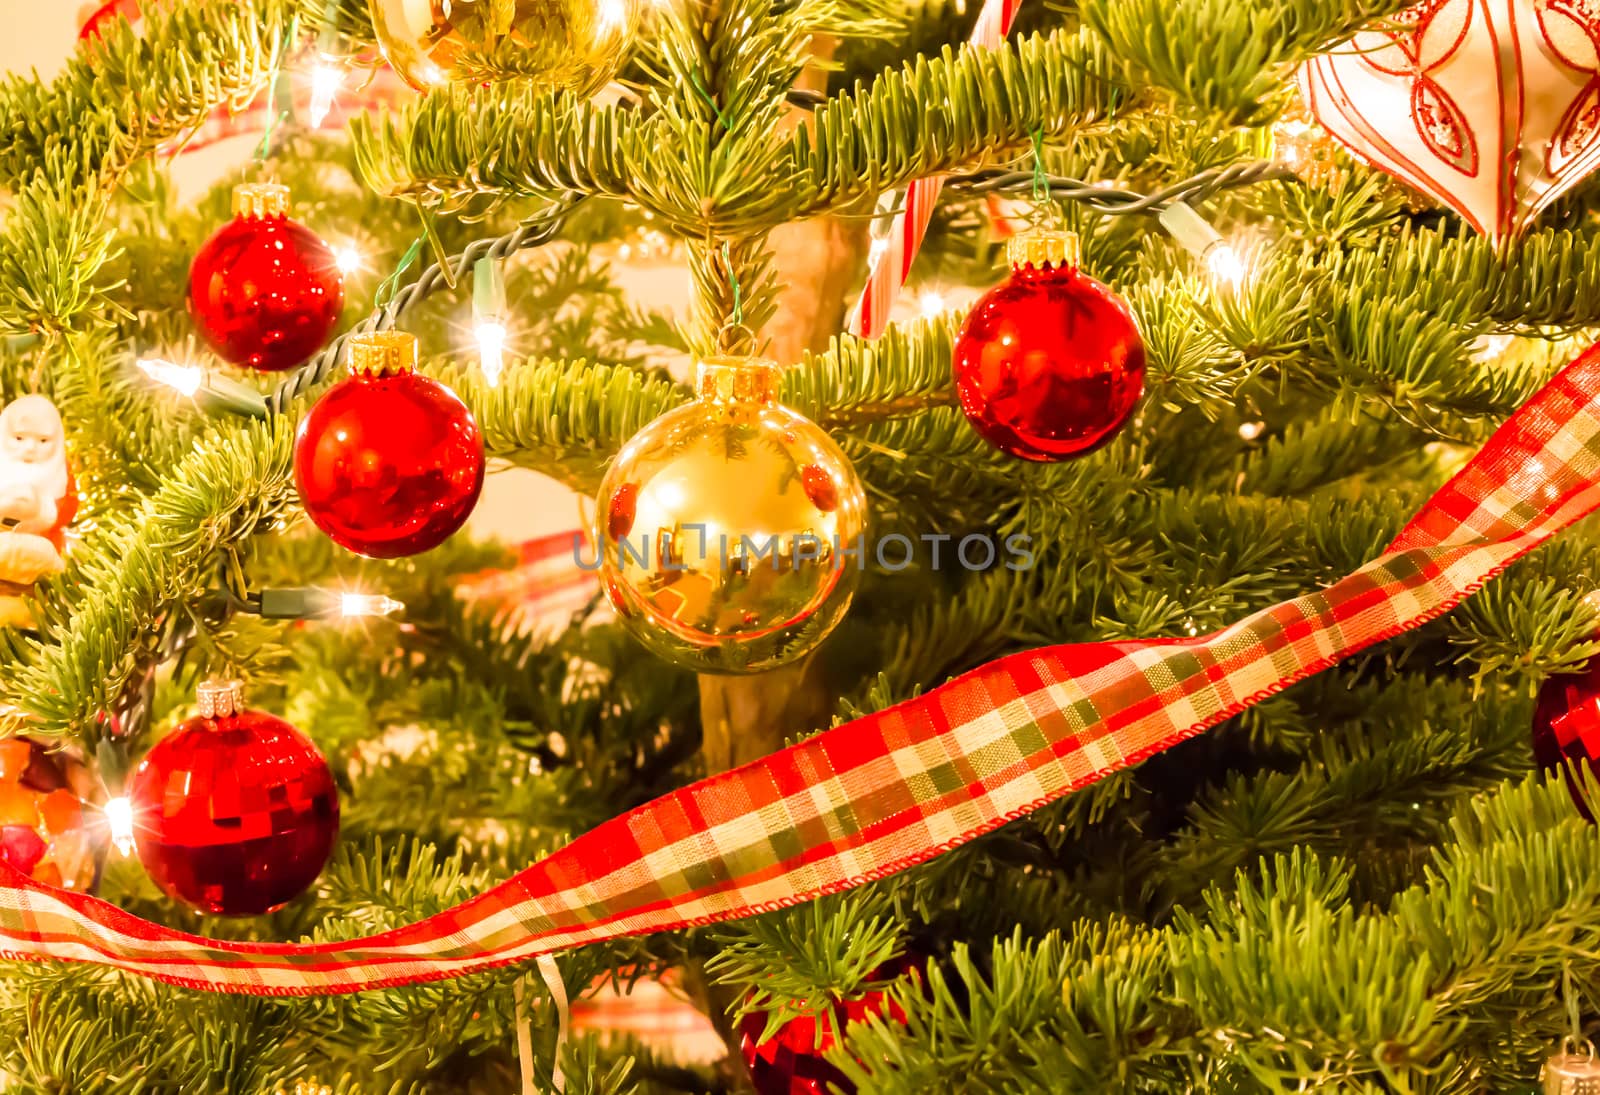 Christmas Ornaments Hanging on a Tree by gregorydean